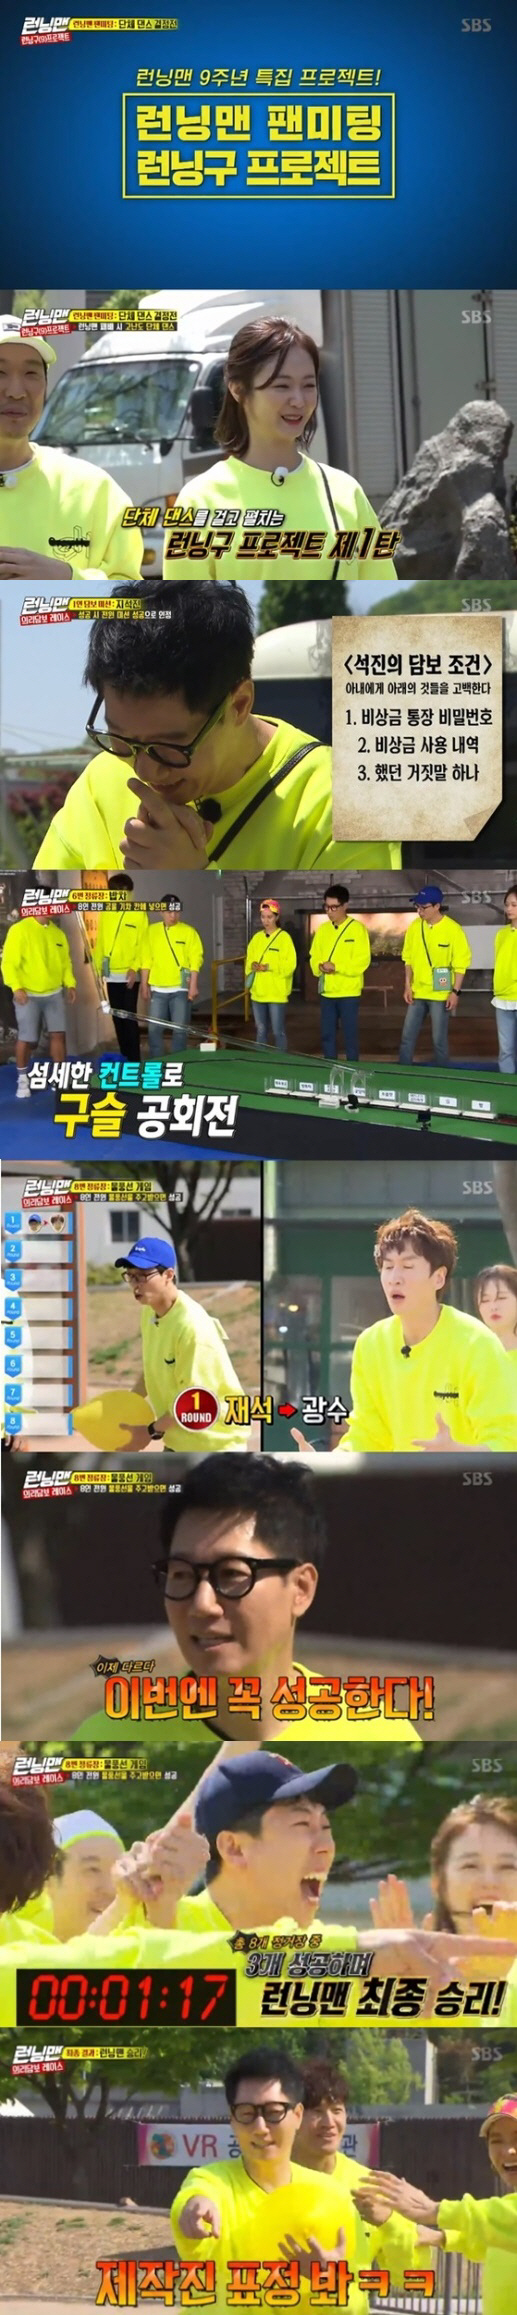 <p> SBS ‘Running Man’this 9th anniversary special project ‘Running Man Love Without Love (Live at Summer Vacation/08 - Run to the tool project’is the first public and viewership dramatically rose.</p><p>The ahead for example and for the ‘Running Man’ 9th anniversary special project ‘Running Man Love Without Love (Live at Summer Vacation/08 - Run to the tool project’first was unveiled. Love Without Love (Live at Summer Vacation/08 CUE sheet configuration rights to two and 4 weeks special race to progress to the creators and members of this day broadcast in the ‘group dance’within the first secret.</p><p>The members of this to start with prepare candidates for dance in addition to I want to dance, but if defeated with a recommendation for a dance should be. This members of the team Curling with a fierce 8-round confrontation began and, after 3 wins in success and victory. This scene is per minute, with a maximum application rate of 8. 9%and the ‘best 1 minute’.</p>